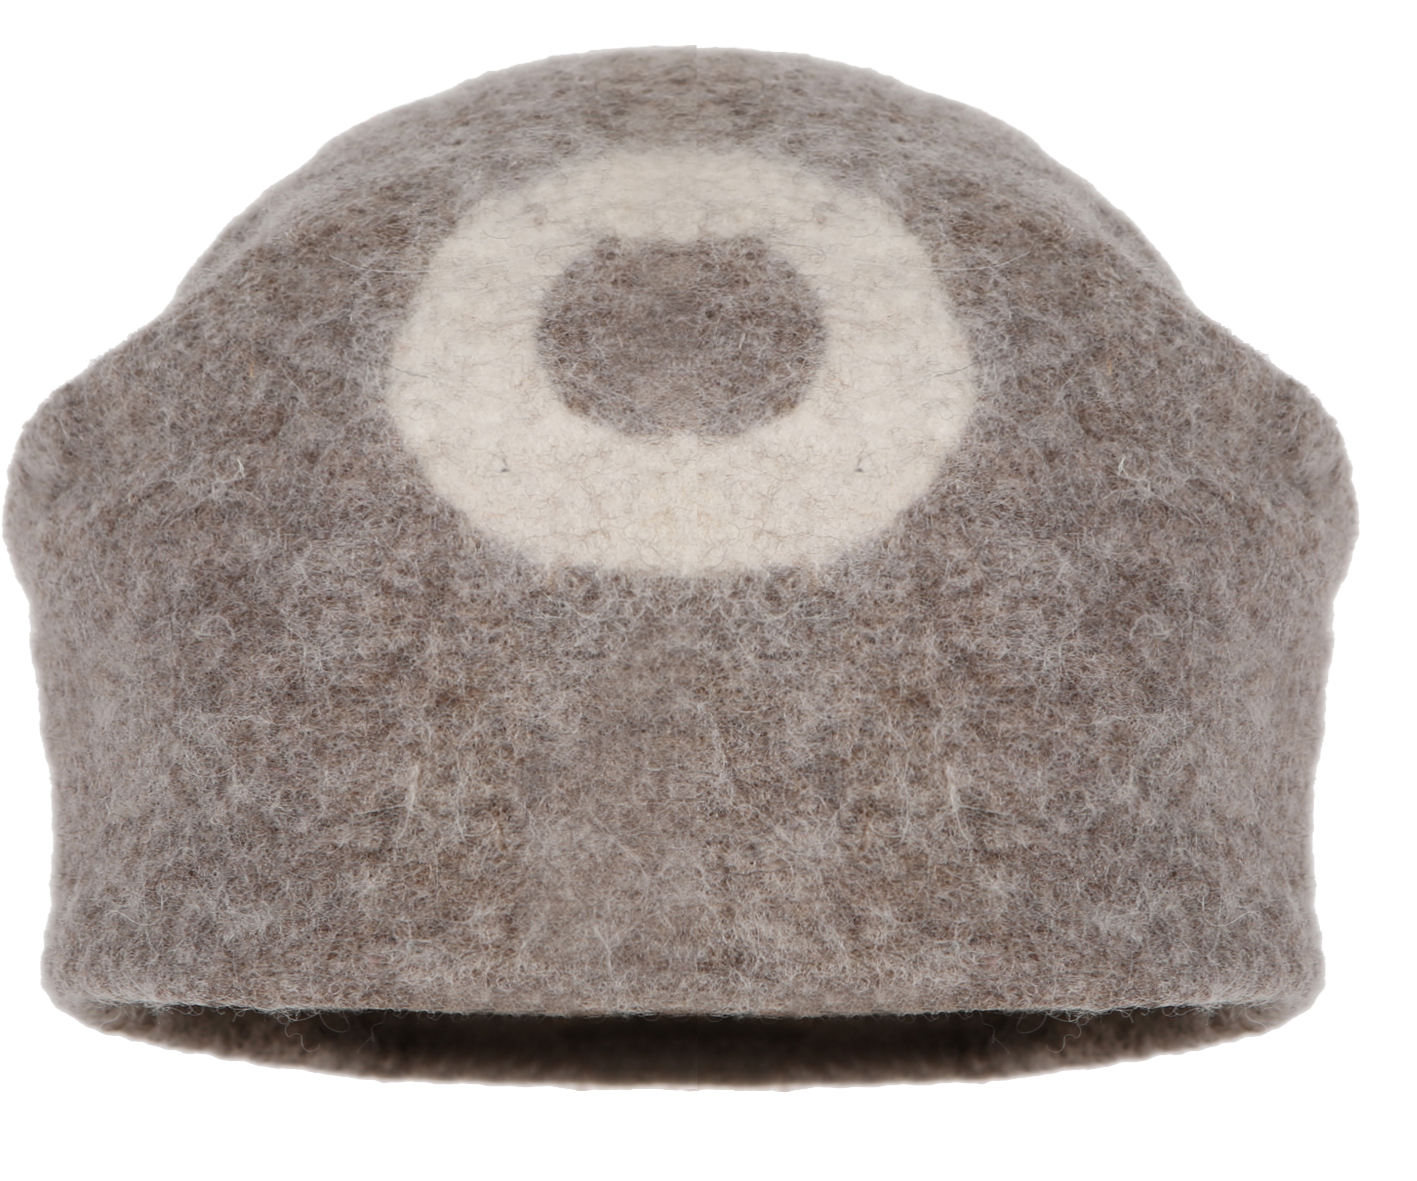 Felt Hat Handmade Oatmeal- One Hat- undyed wool wet felted unisex hat. Handmade in Ireland from Superfine Merino Wool with One Circle Detail.